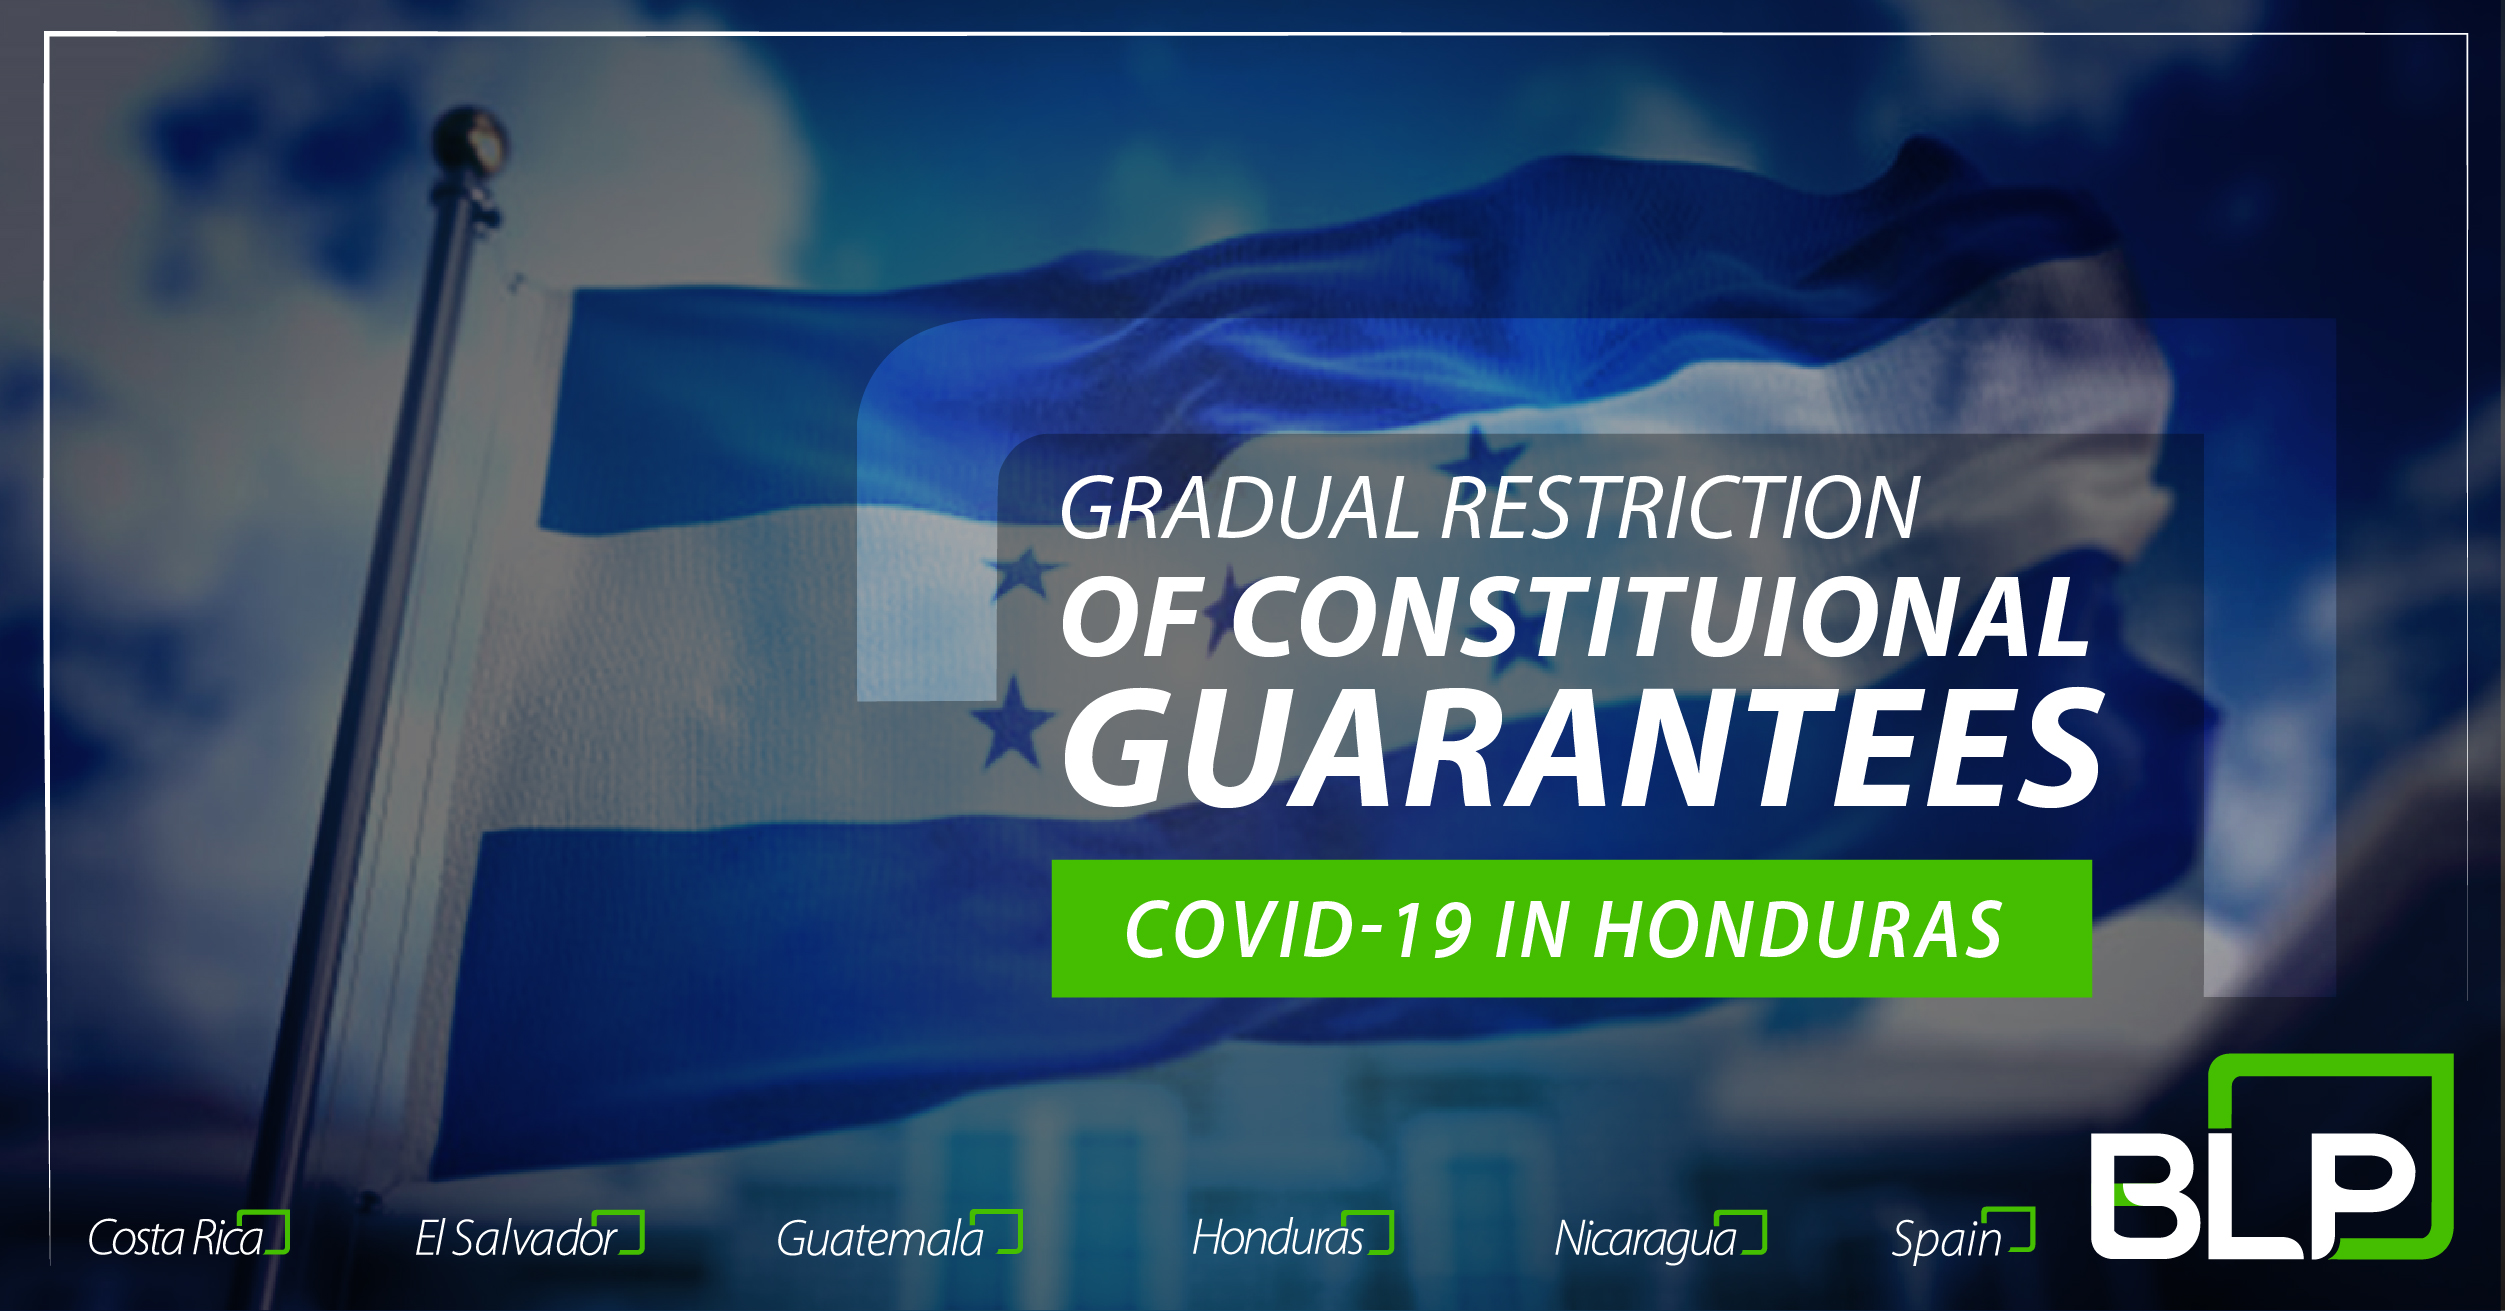 Gradual restriction of constitutional guarantees in Honduras due to COVID-19.